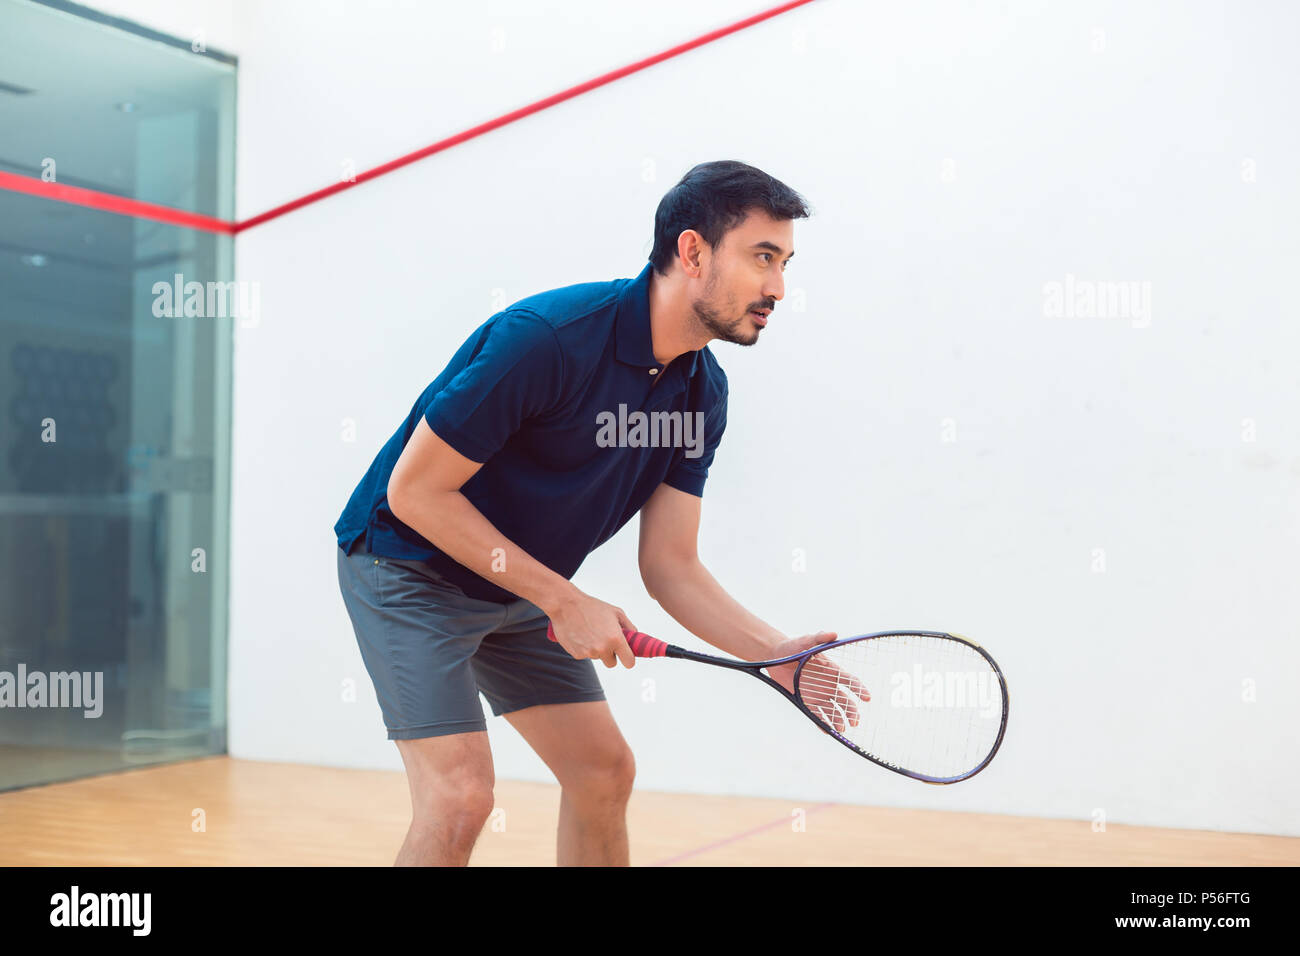 Young squash player holding the racket during game on a professional court Stock Photo